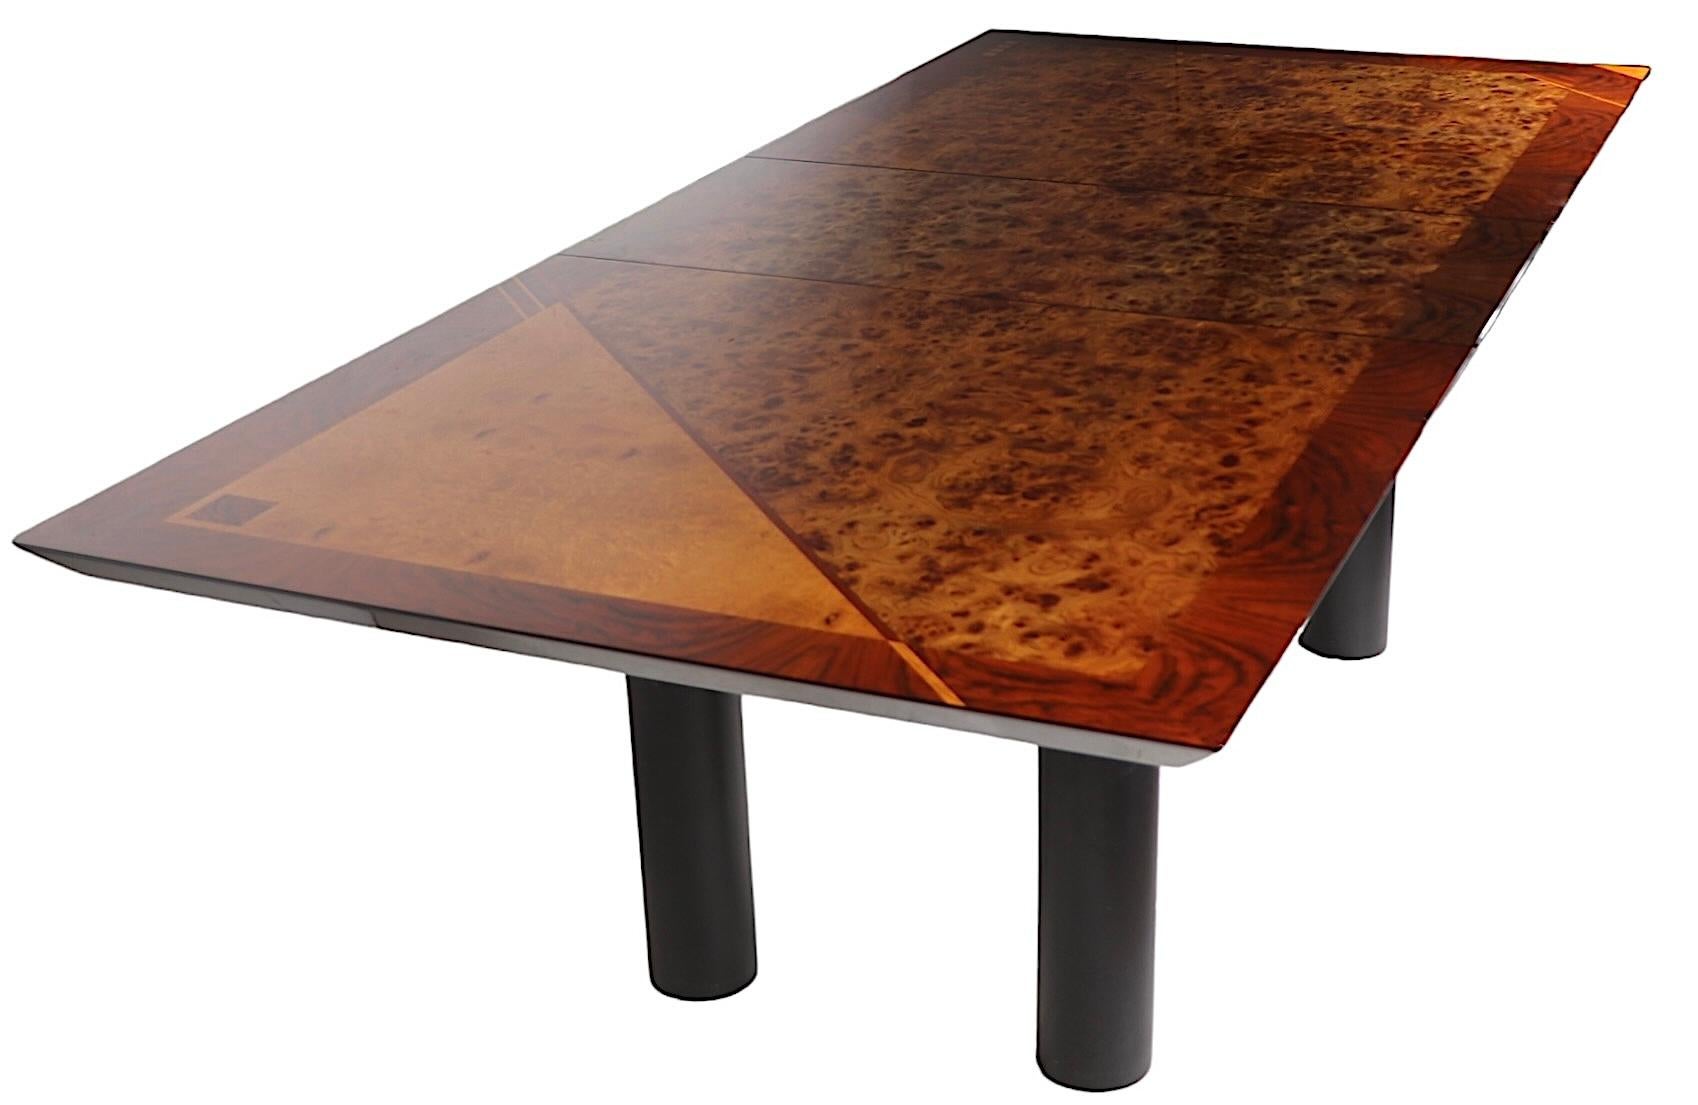 Italian Post Modern Dining Table by Oscar Dell Arredamento for Miniforms c 1970s For Sale 11